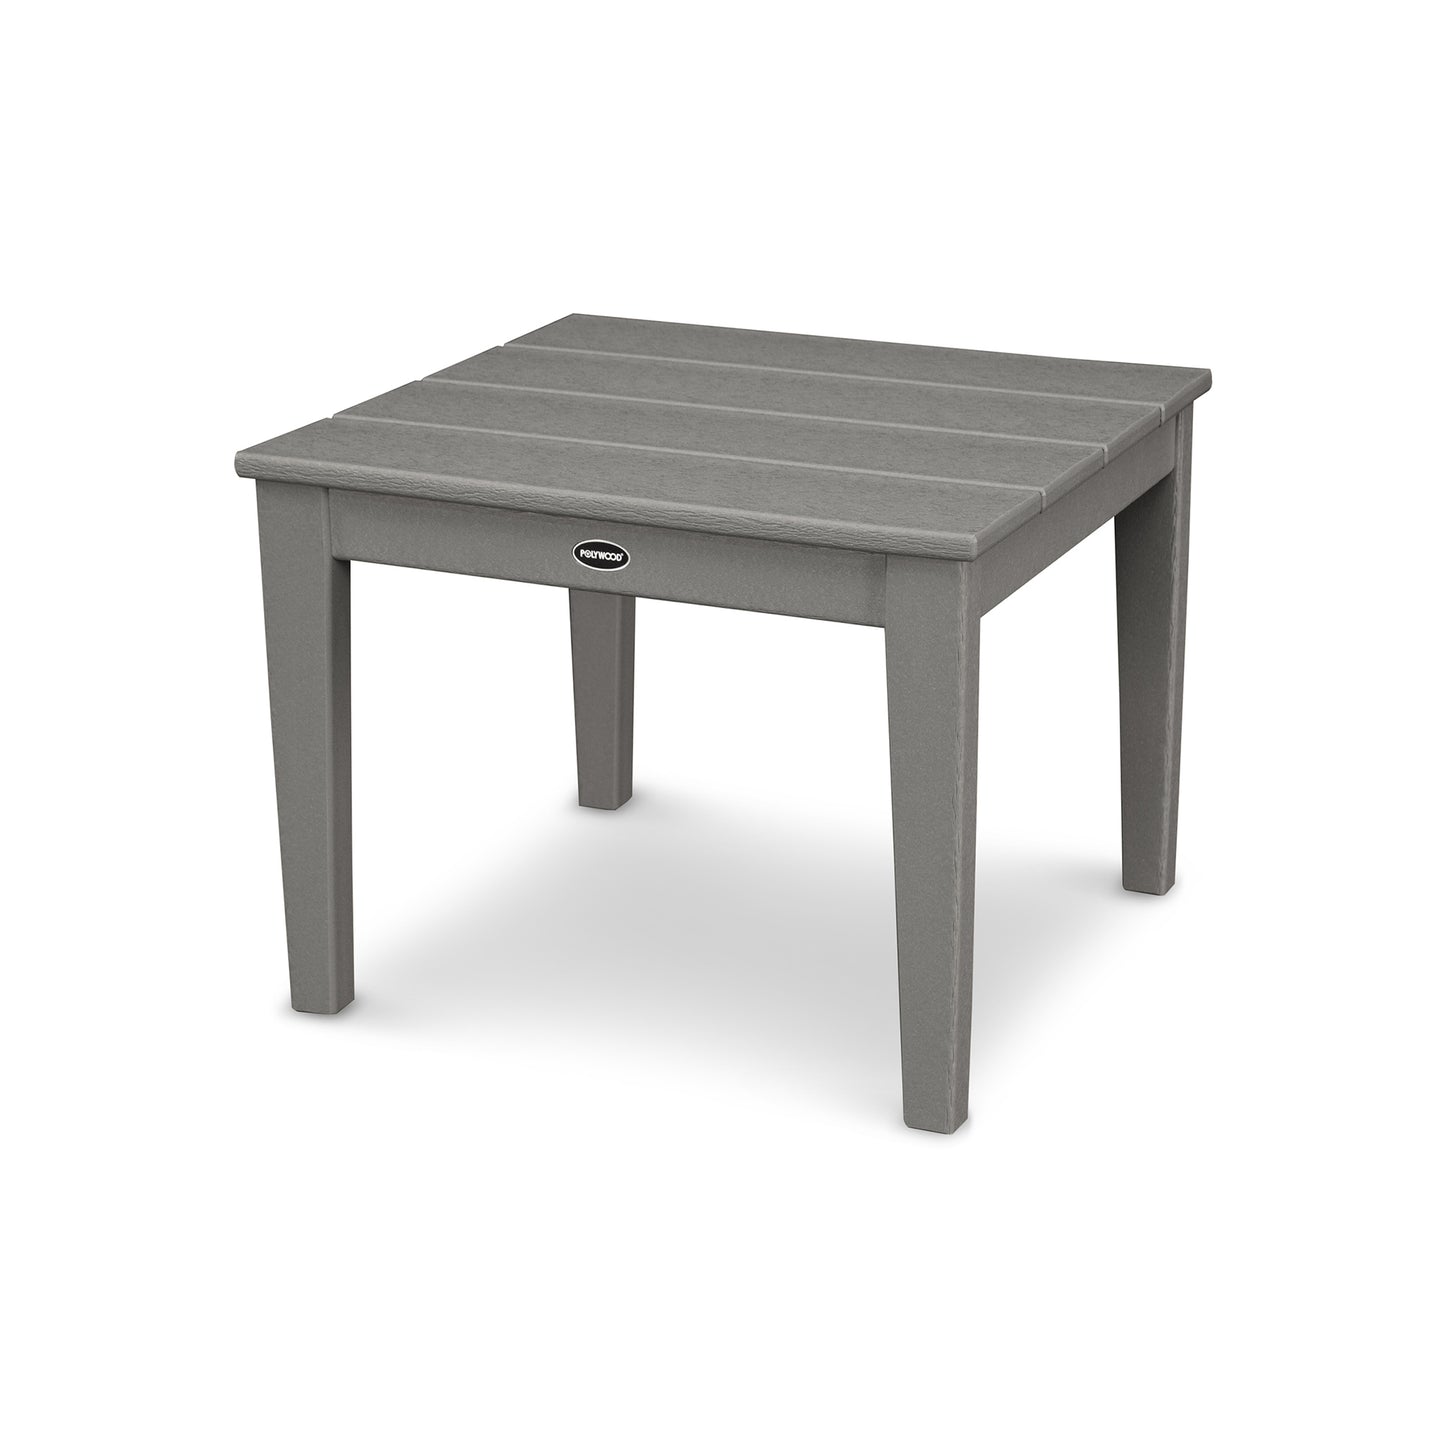 A square, gray POLYWOOD Newport 22" end table made of durable plastic, featuring a slatted top and sturdy legs, with a small logo on one side. The table is depicted against a plain white background.